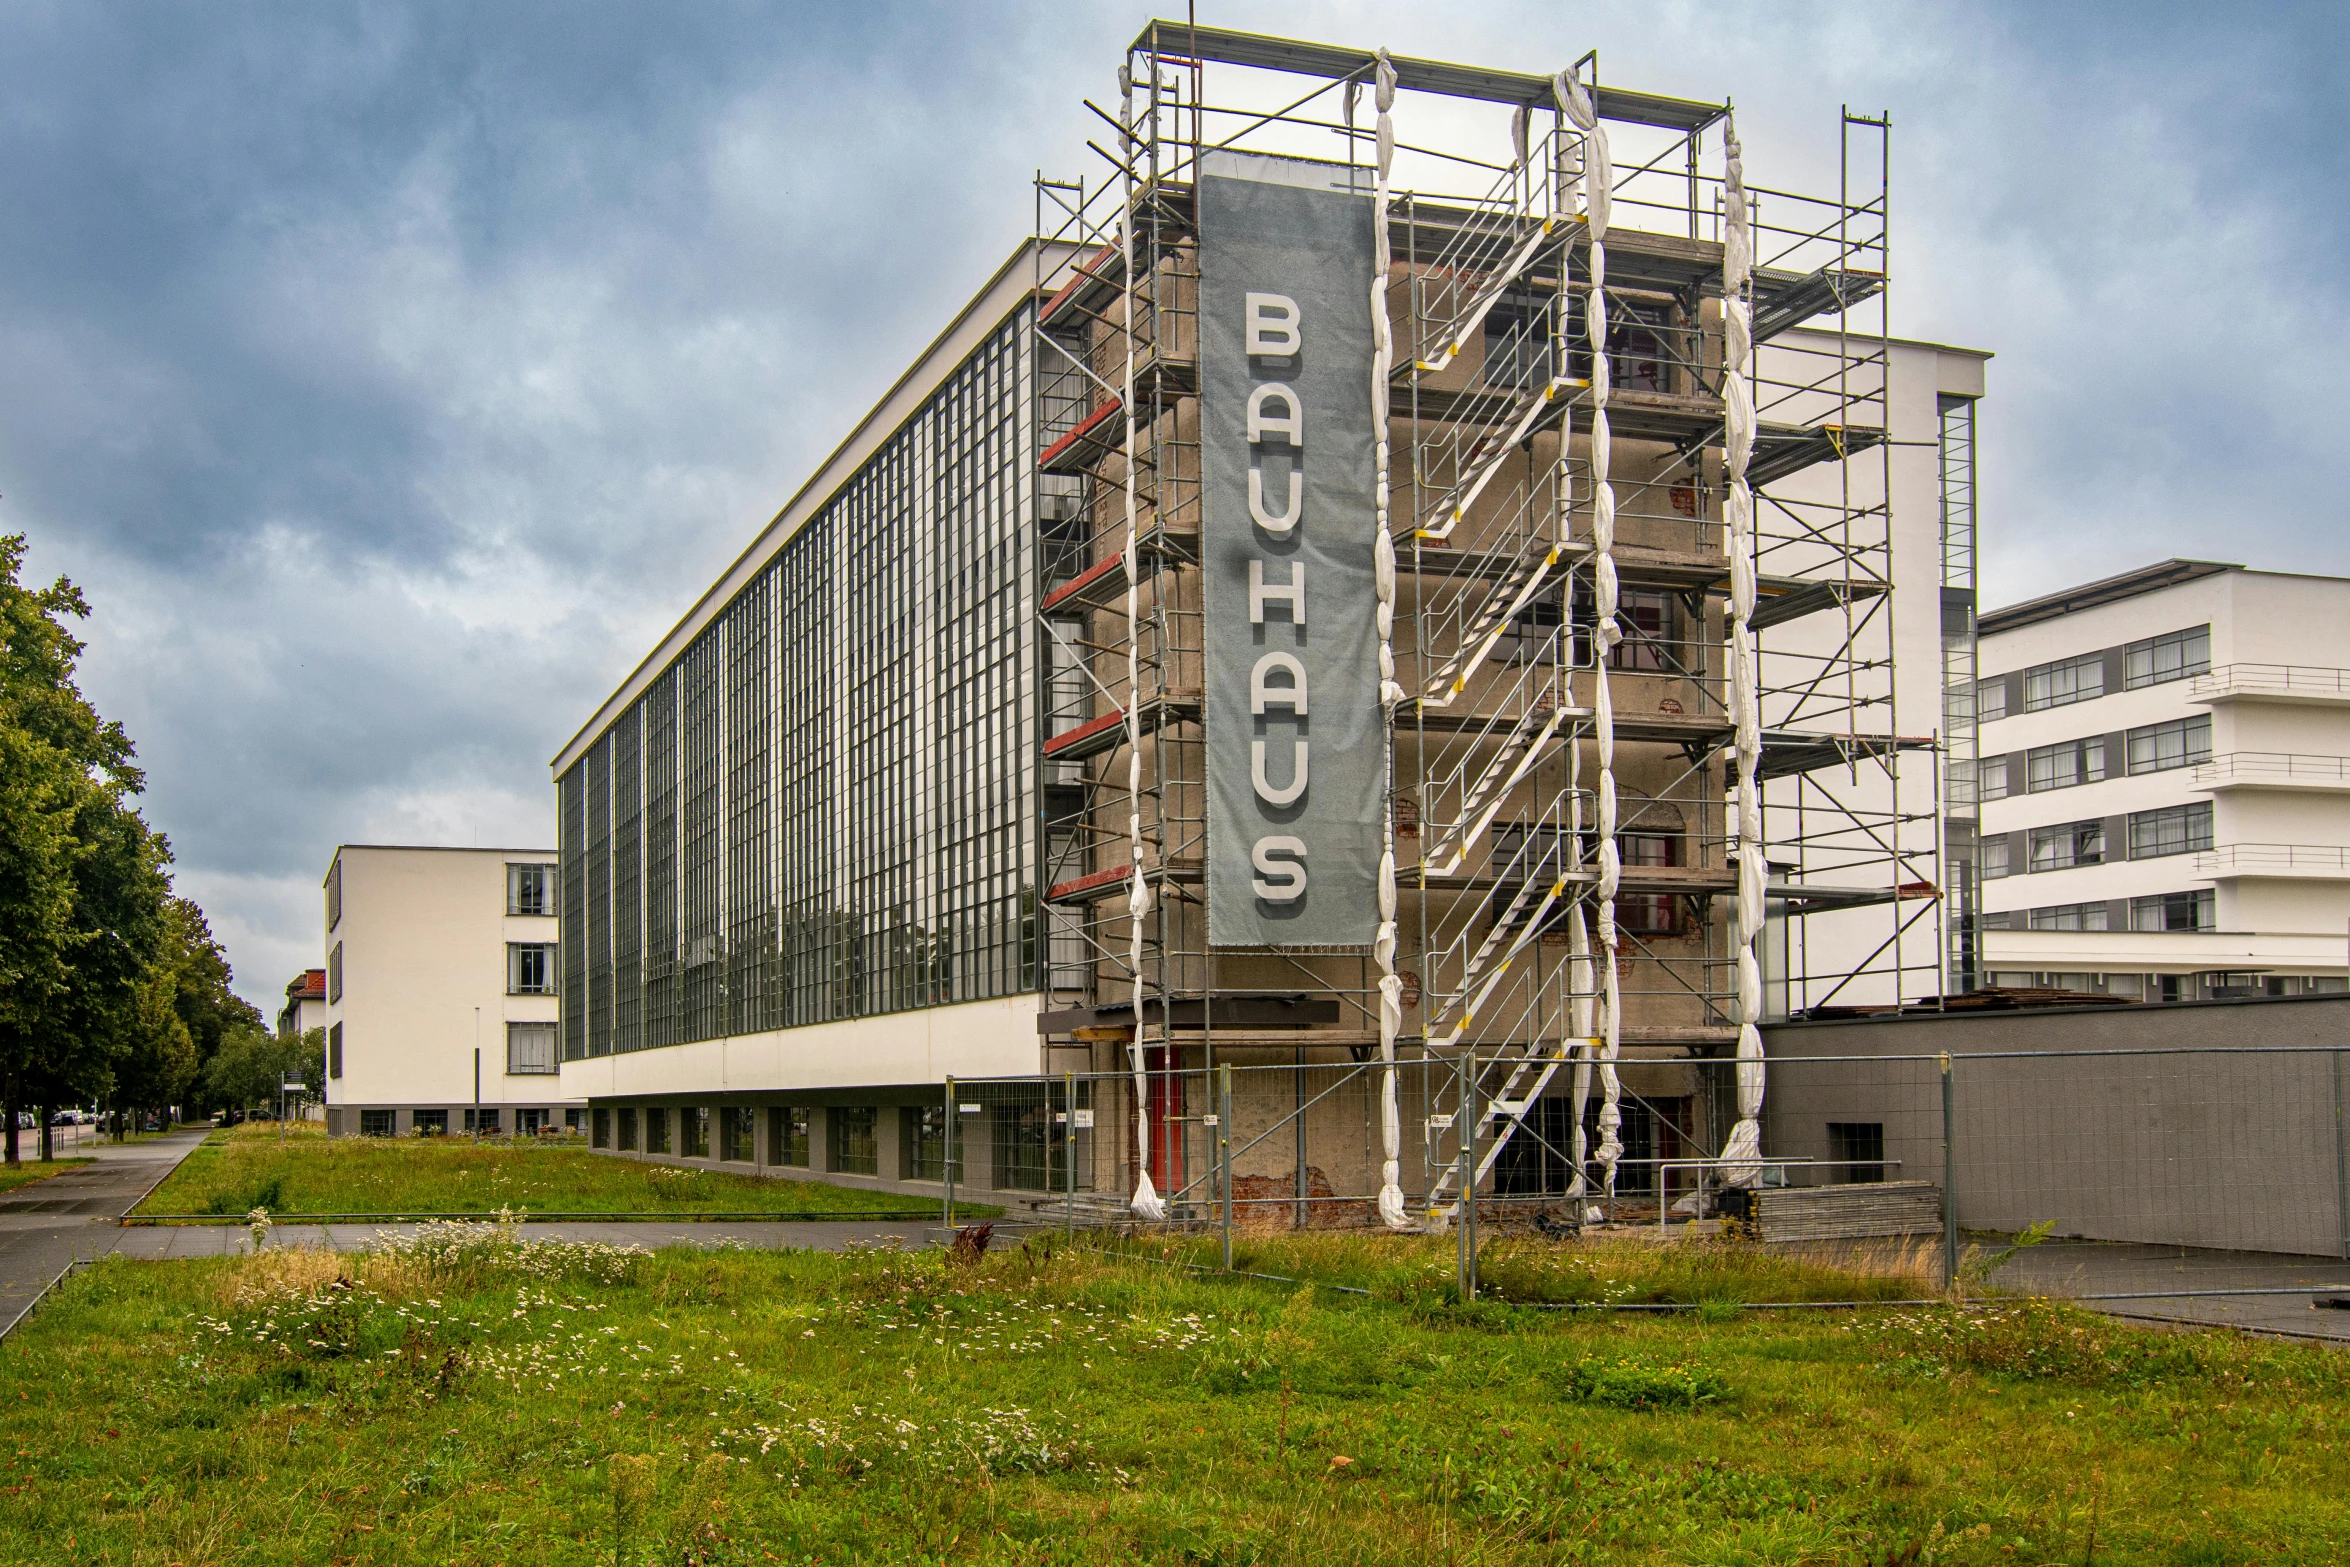 a building being built in the middle of a grass area with scaffolding around it